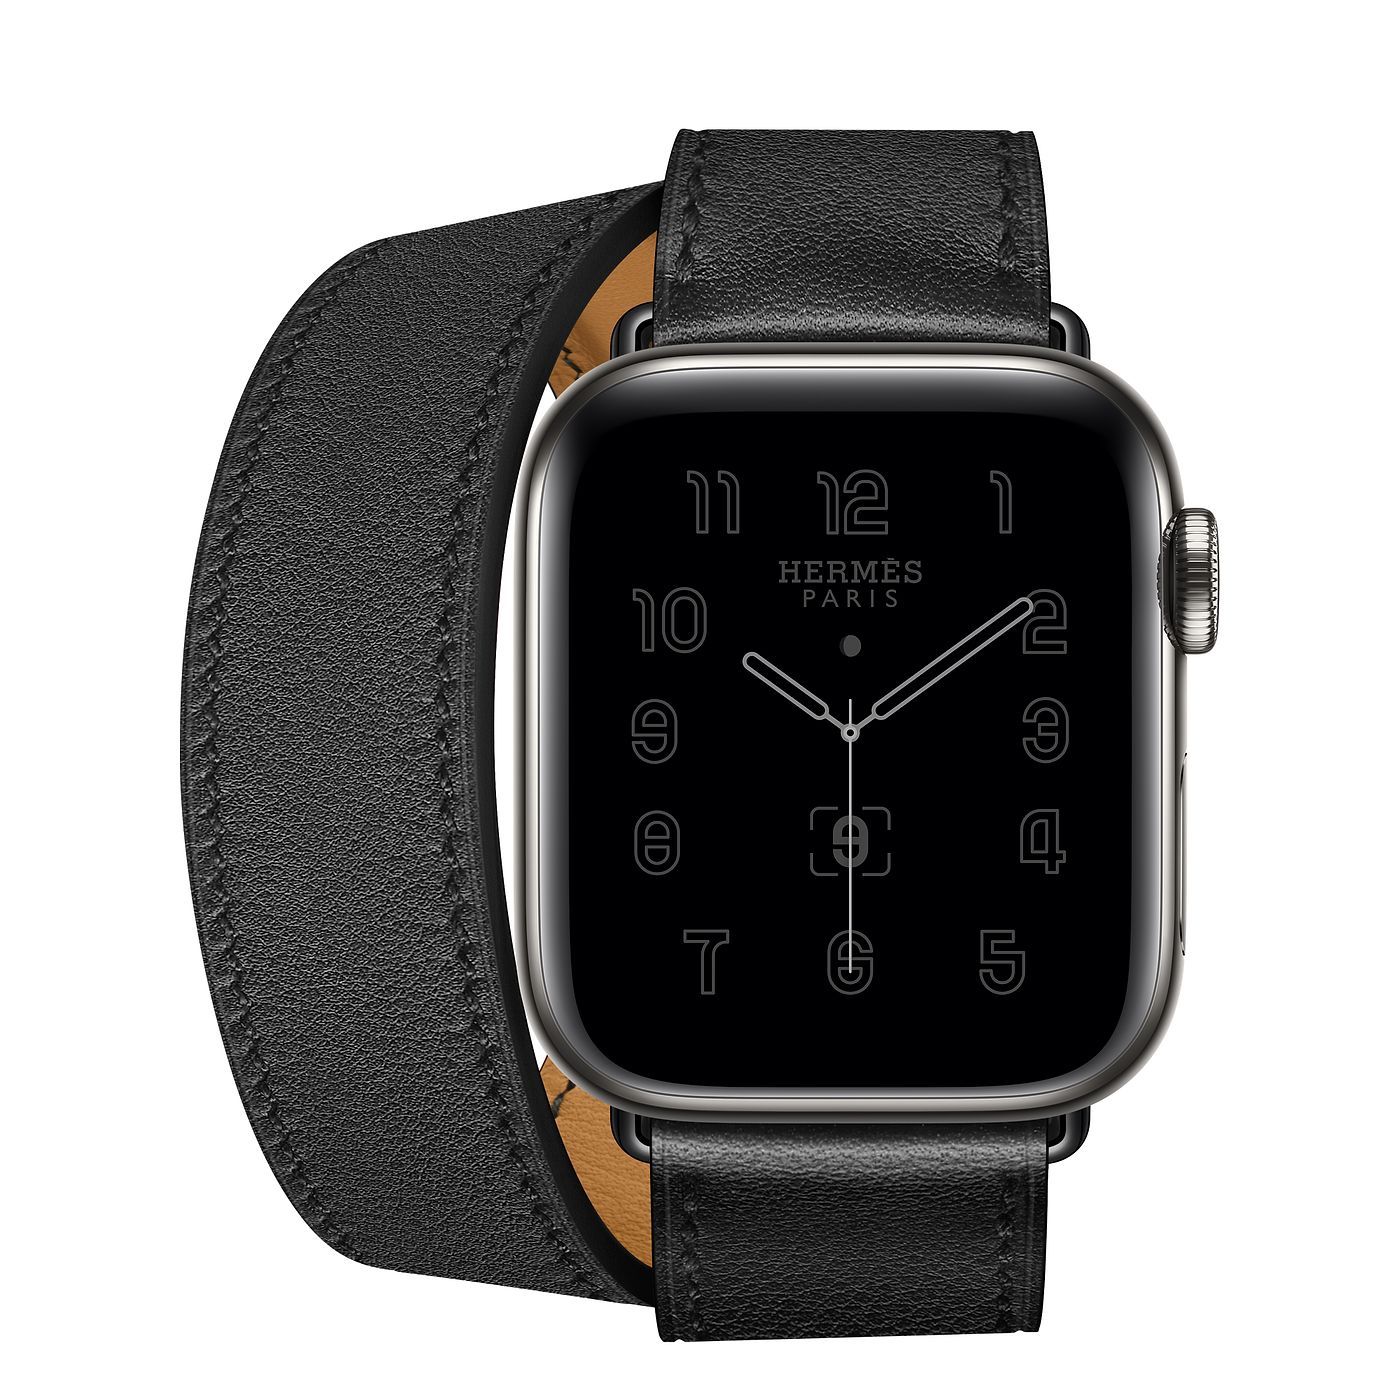  Apple Watch 40mm Hermès Space Black Stainless Steel Case with Noir Swift Leather Double Tour 